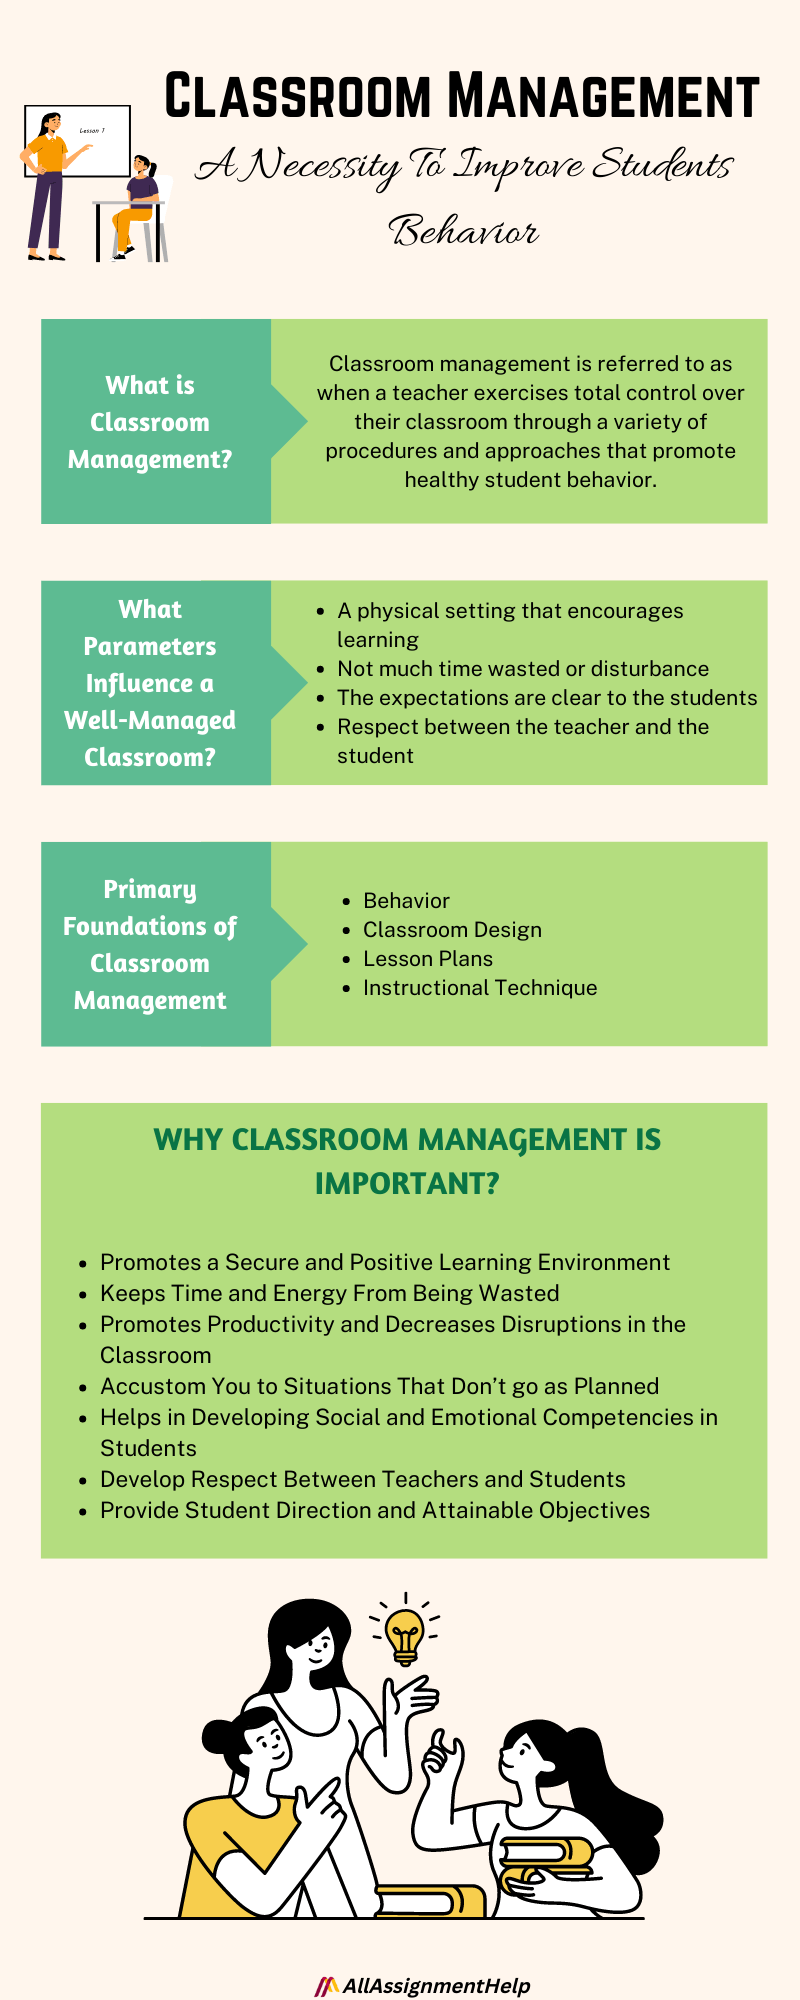 Effective Classroom Management - The Key to a More Inclusive Learning